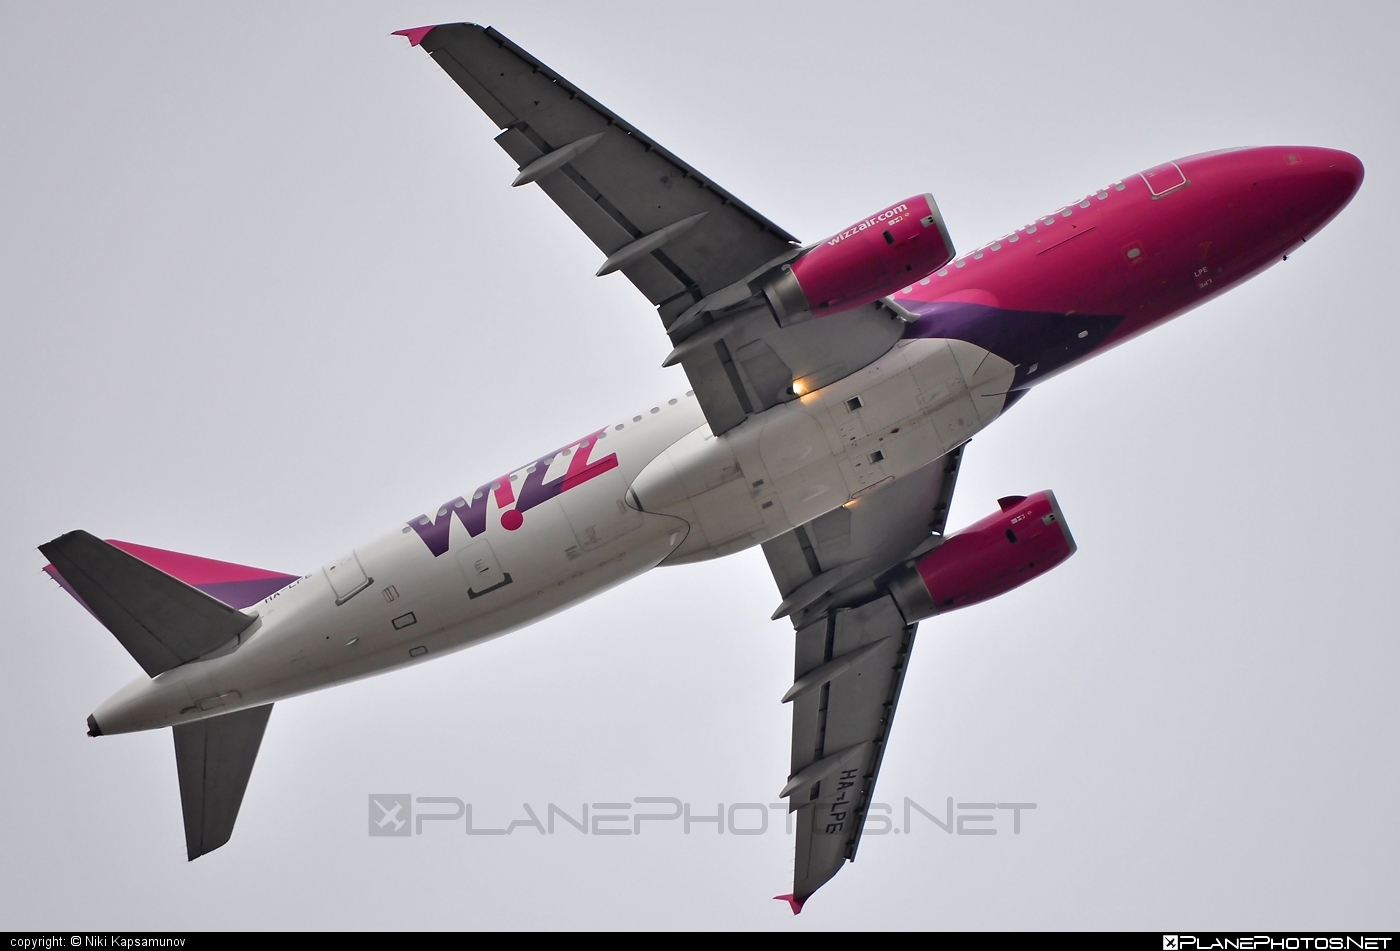 Airbus A320-233 - HA-LPE operated by Wizz Air #a320 #a320family #airbus #airbus320 #wizz #wizzair